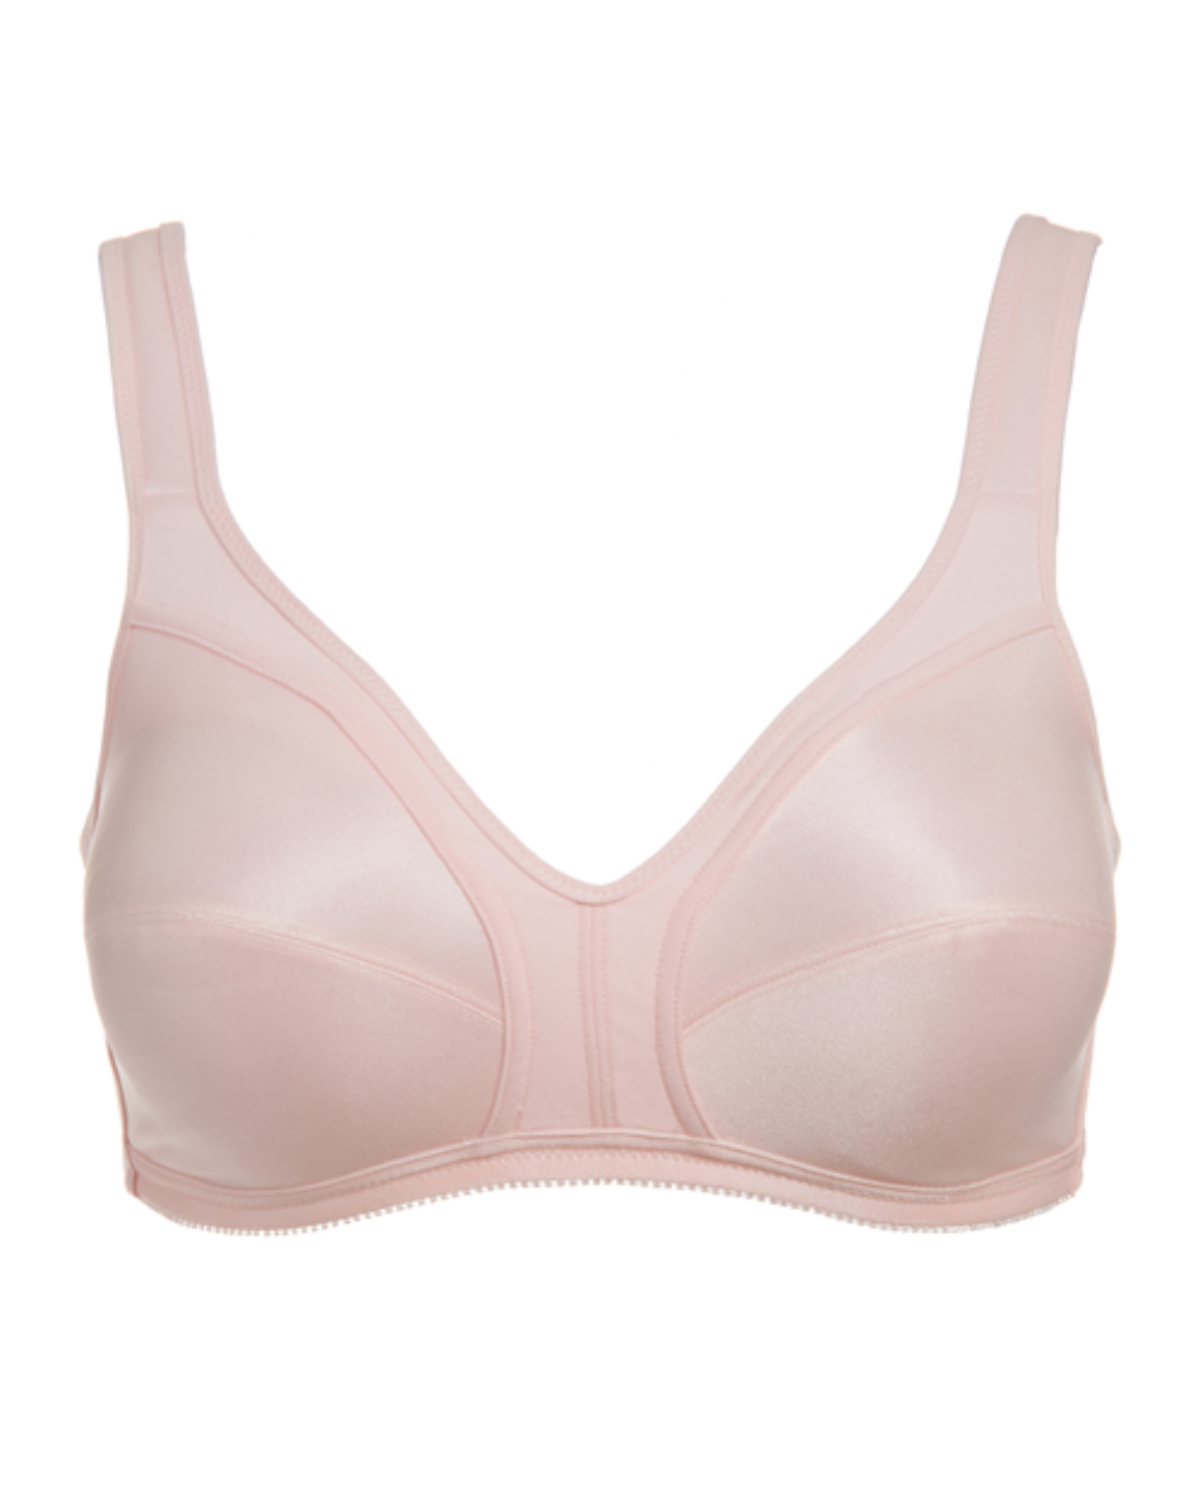 Dominique Isabelle Wire Free Cotton Lined Bra (More colors available) –  Blum's Swimwear & Intimate Apparel